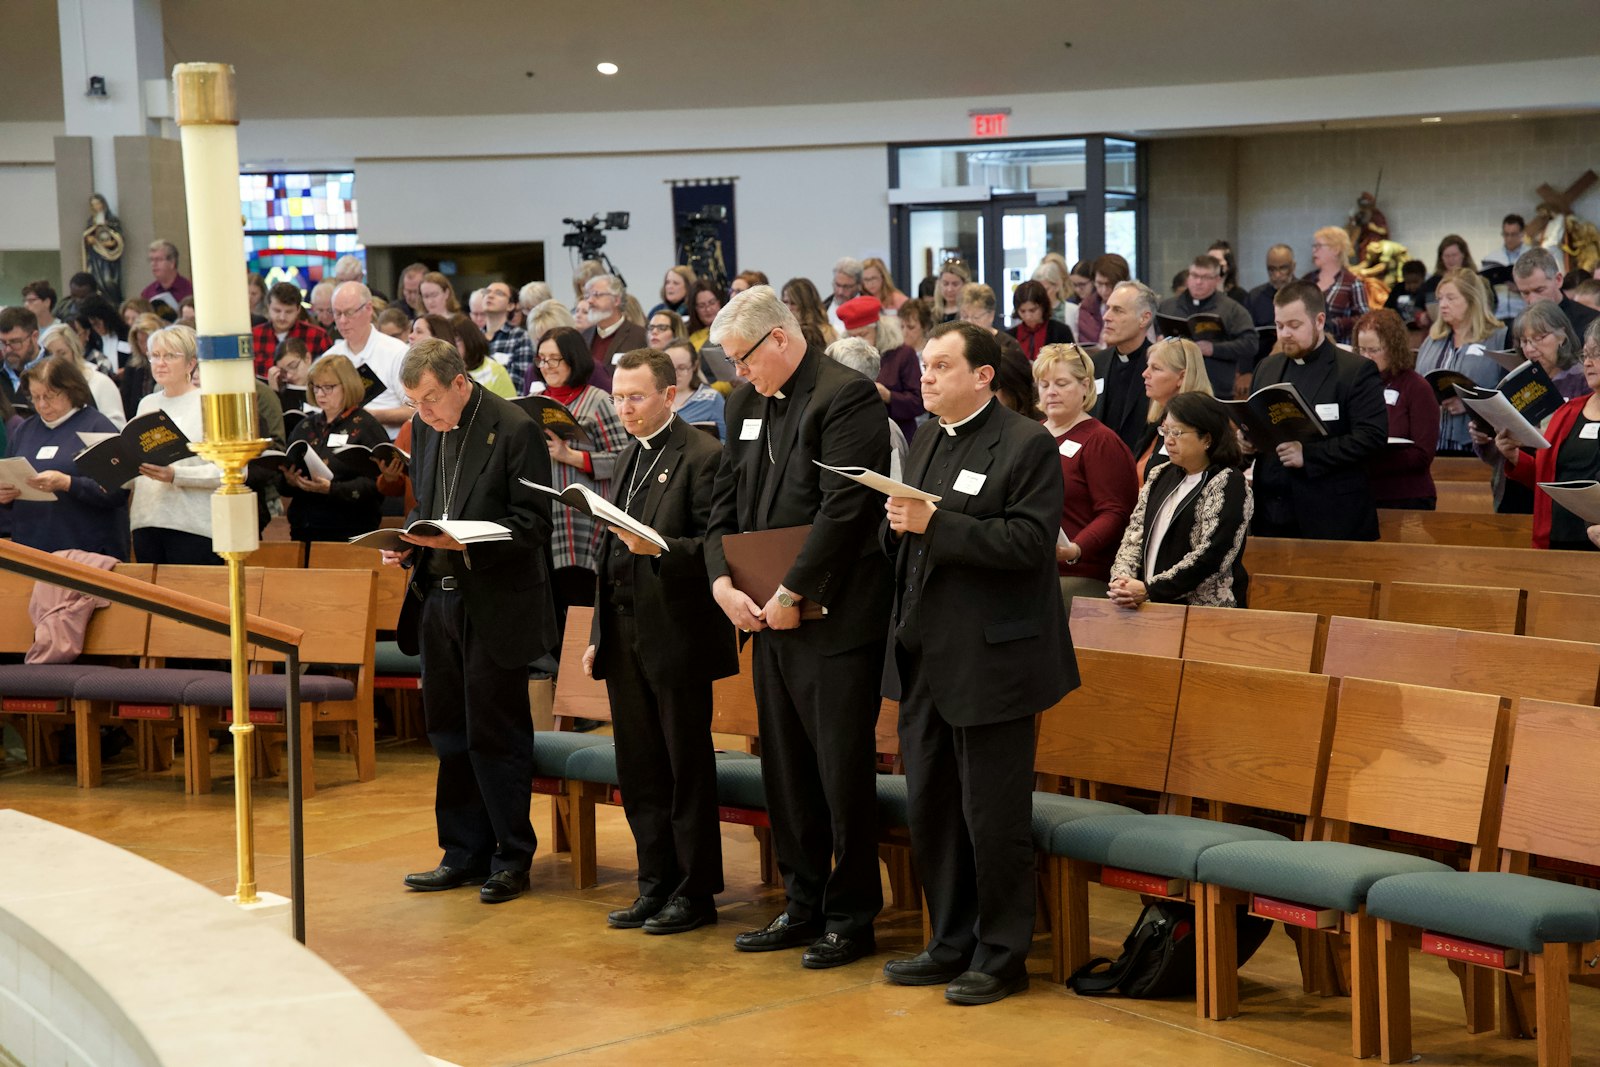 From left, Detroit Archbishop Allen H. Vigneron, Bishop Andrew Cozzens of the Diocese of Crookston, Minn., Detroit Auxiliary Bishop Gerard W. Battersby and Fr. Jeffrey Day, moderator of the curia for the Archdiocese of Detroit, lead hundreds in prayer during the Unleash the Gospel Conference on Nov. 18 at Our Lady of Good Counsel Parish in Plymouth.